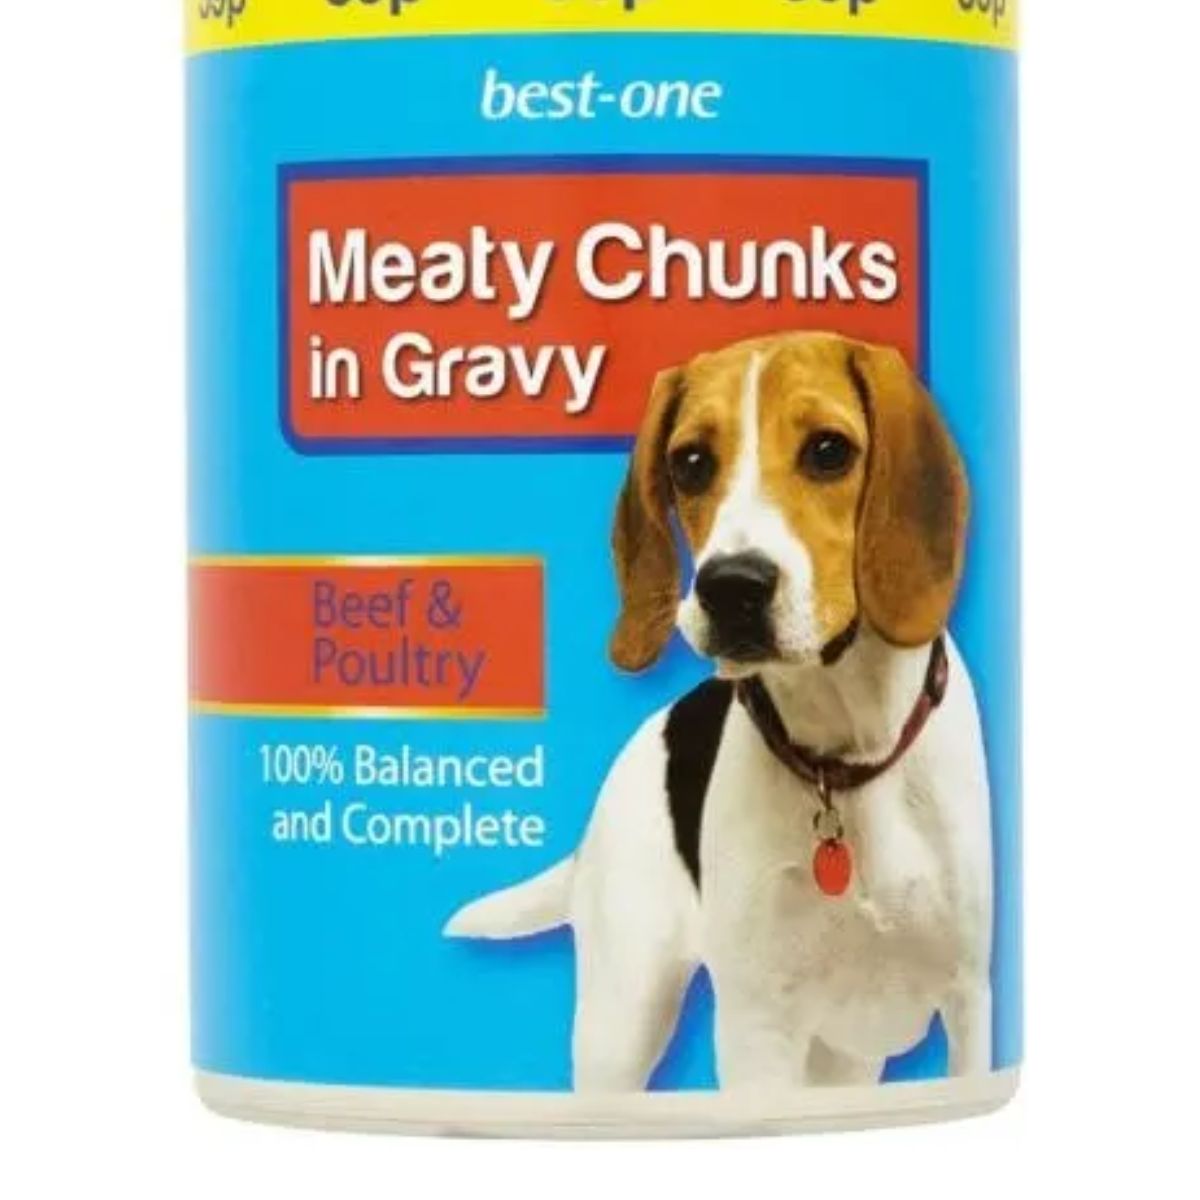 Best One - Dog Food Beef & Poultry - 400g meaty chunks in gravy.